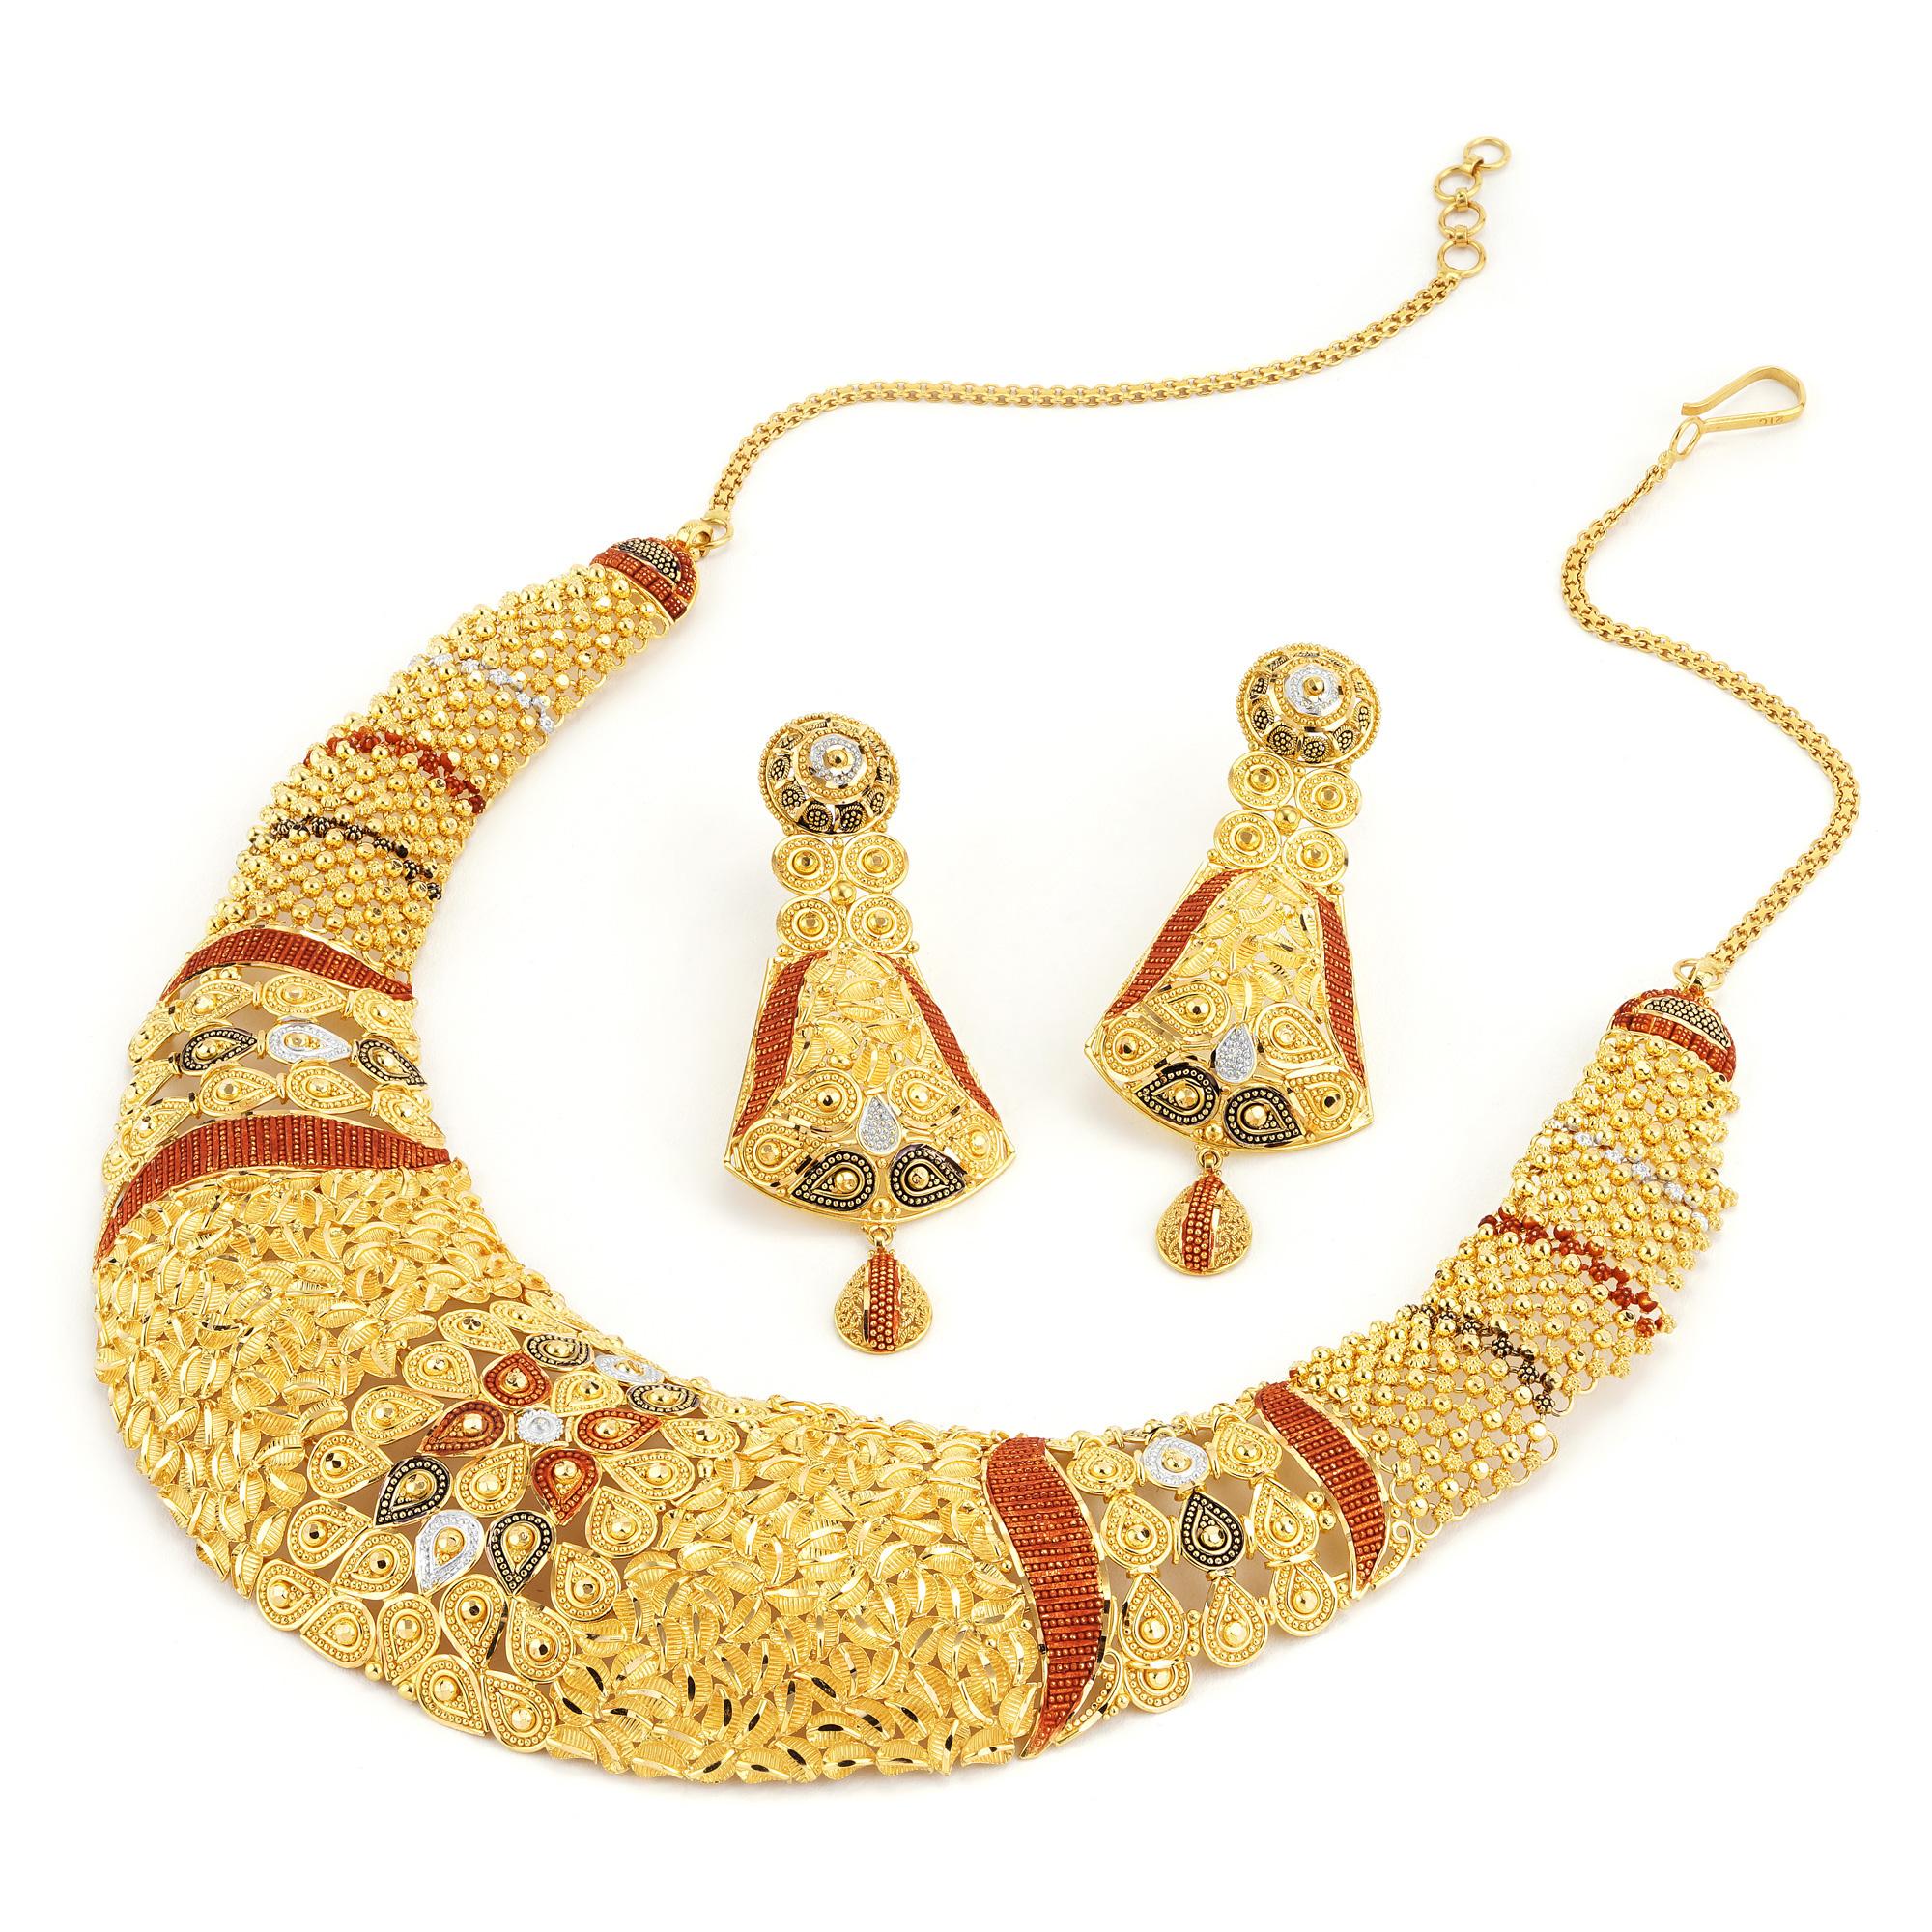 This exquisite antique jewelry set exudes timeless elegance and opulence. Crafted from lustrous 21 karat yellow gold, the set carries a weighty feel, boasting a total of 105 grams of precious metal. Each piece in this set is a testament to the